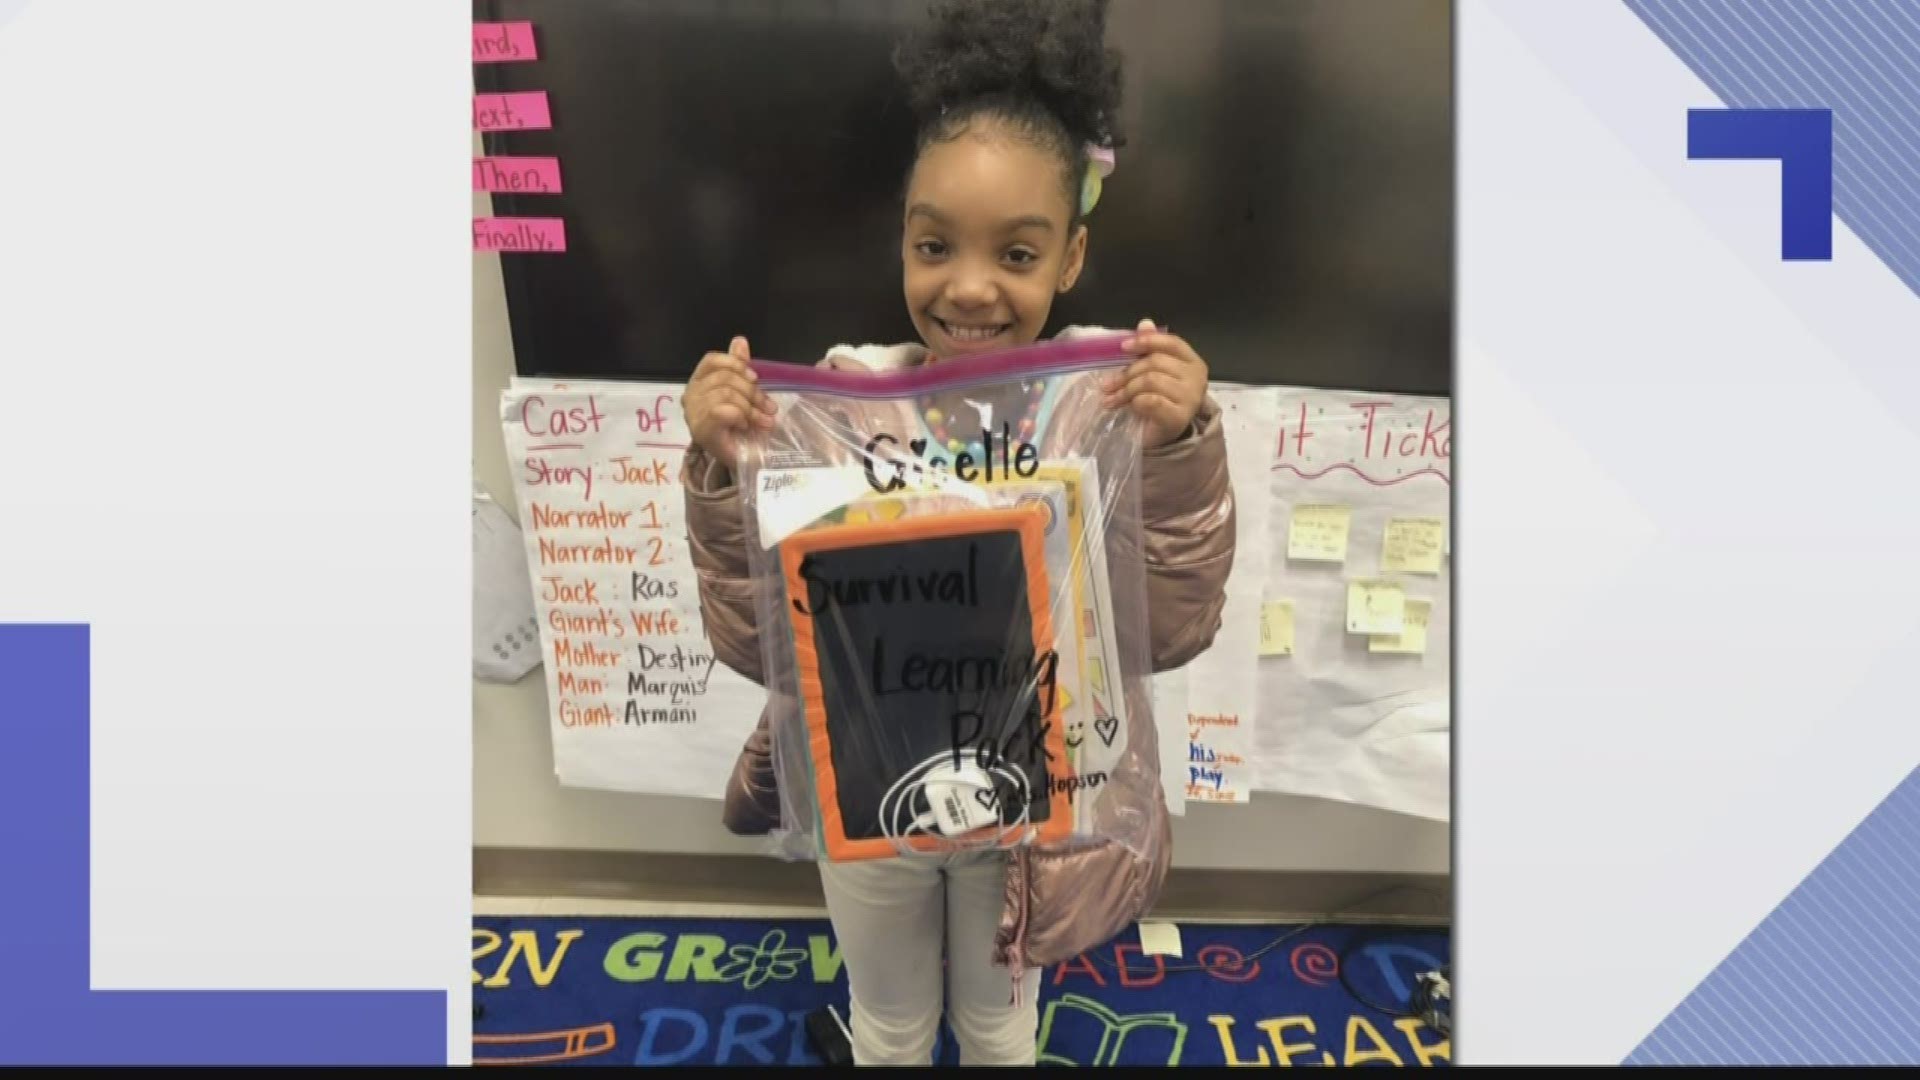 A principal snapped a photo of one of her studetns with her learning pack.